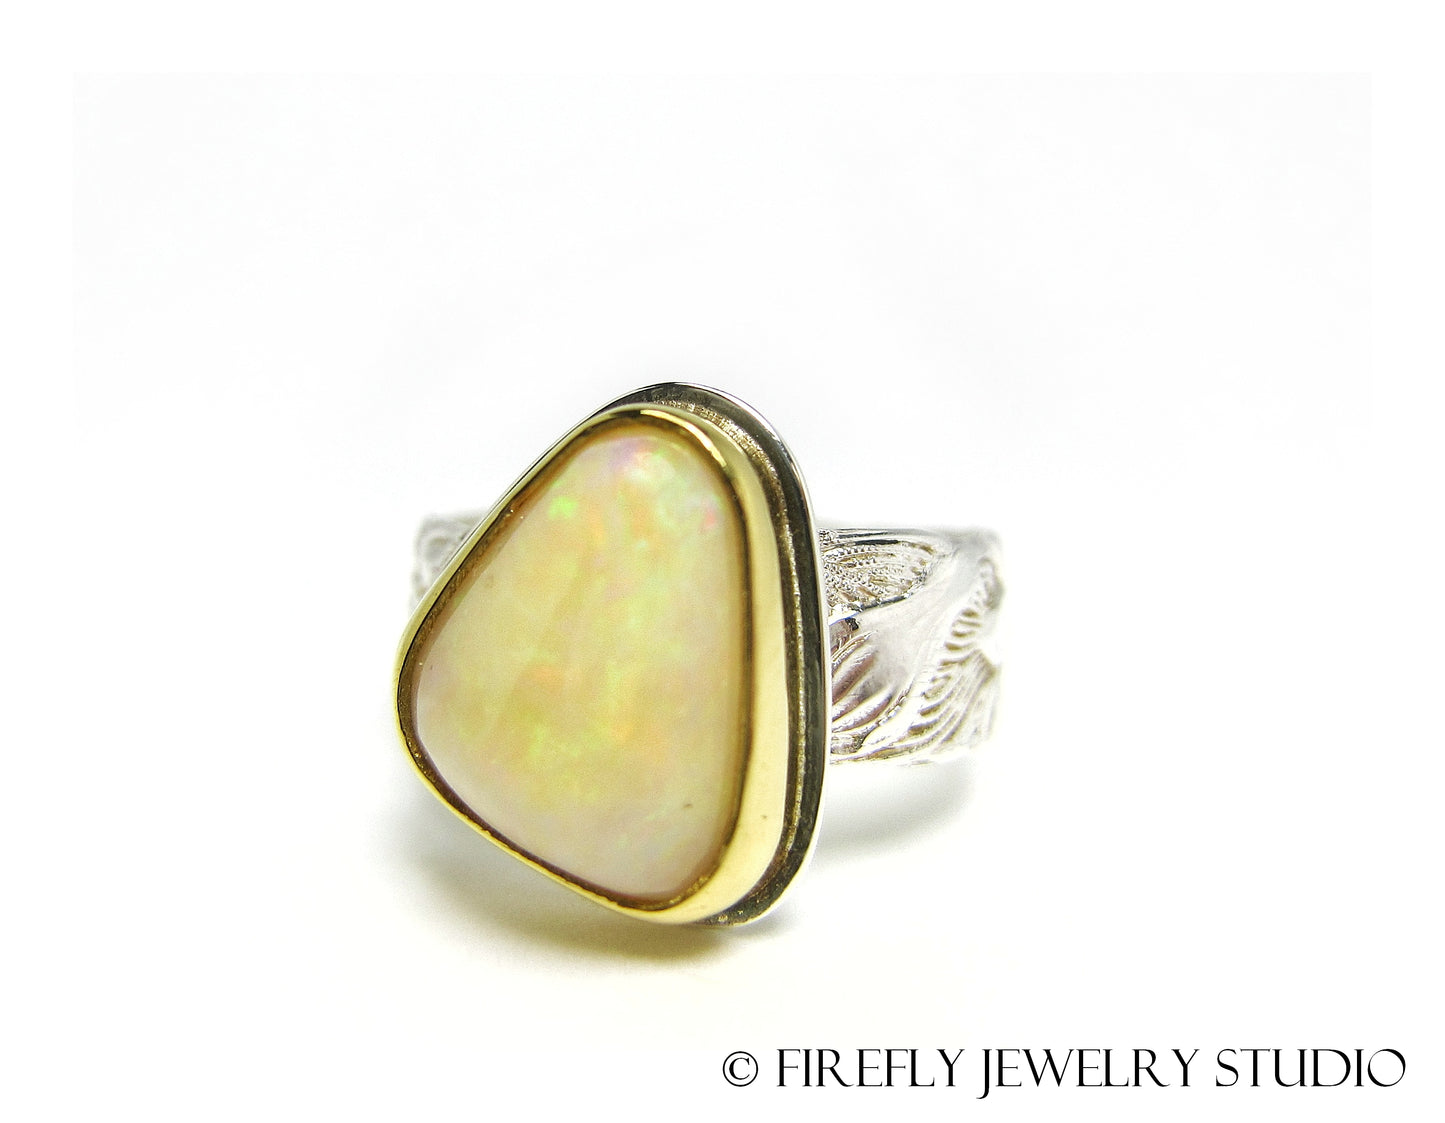 White Australian Opal Ring in 24k Gold and Sterling Silver with Lily Band. Size 7.25 - Firefly Jewelry Studio